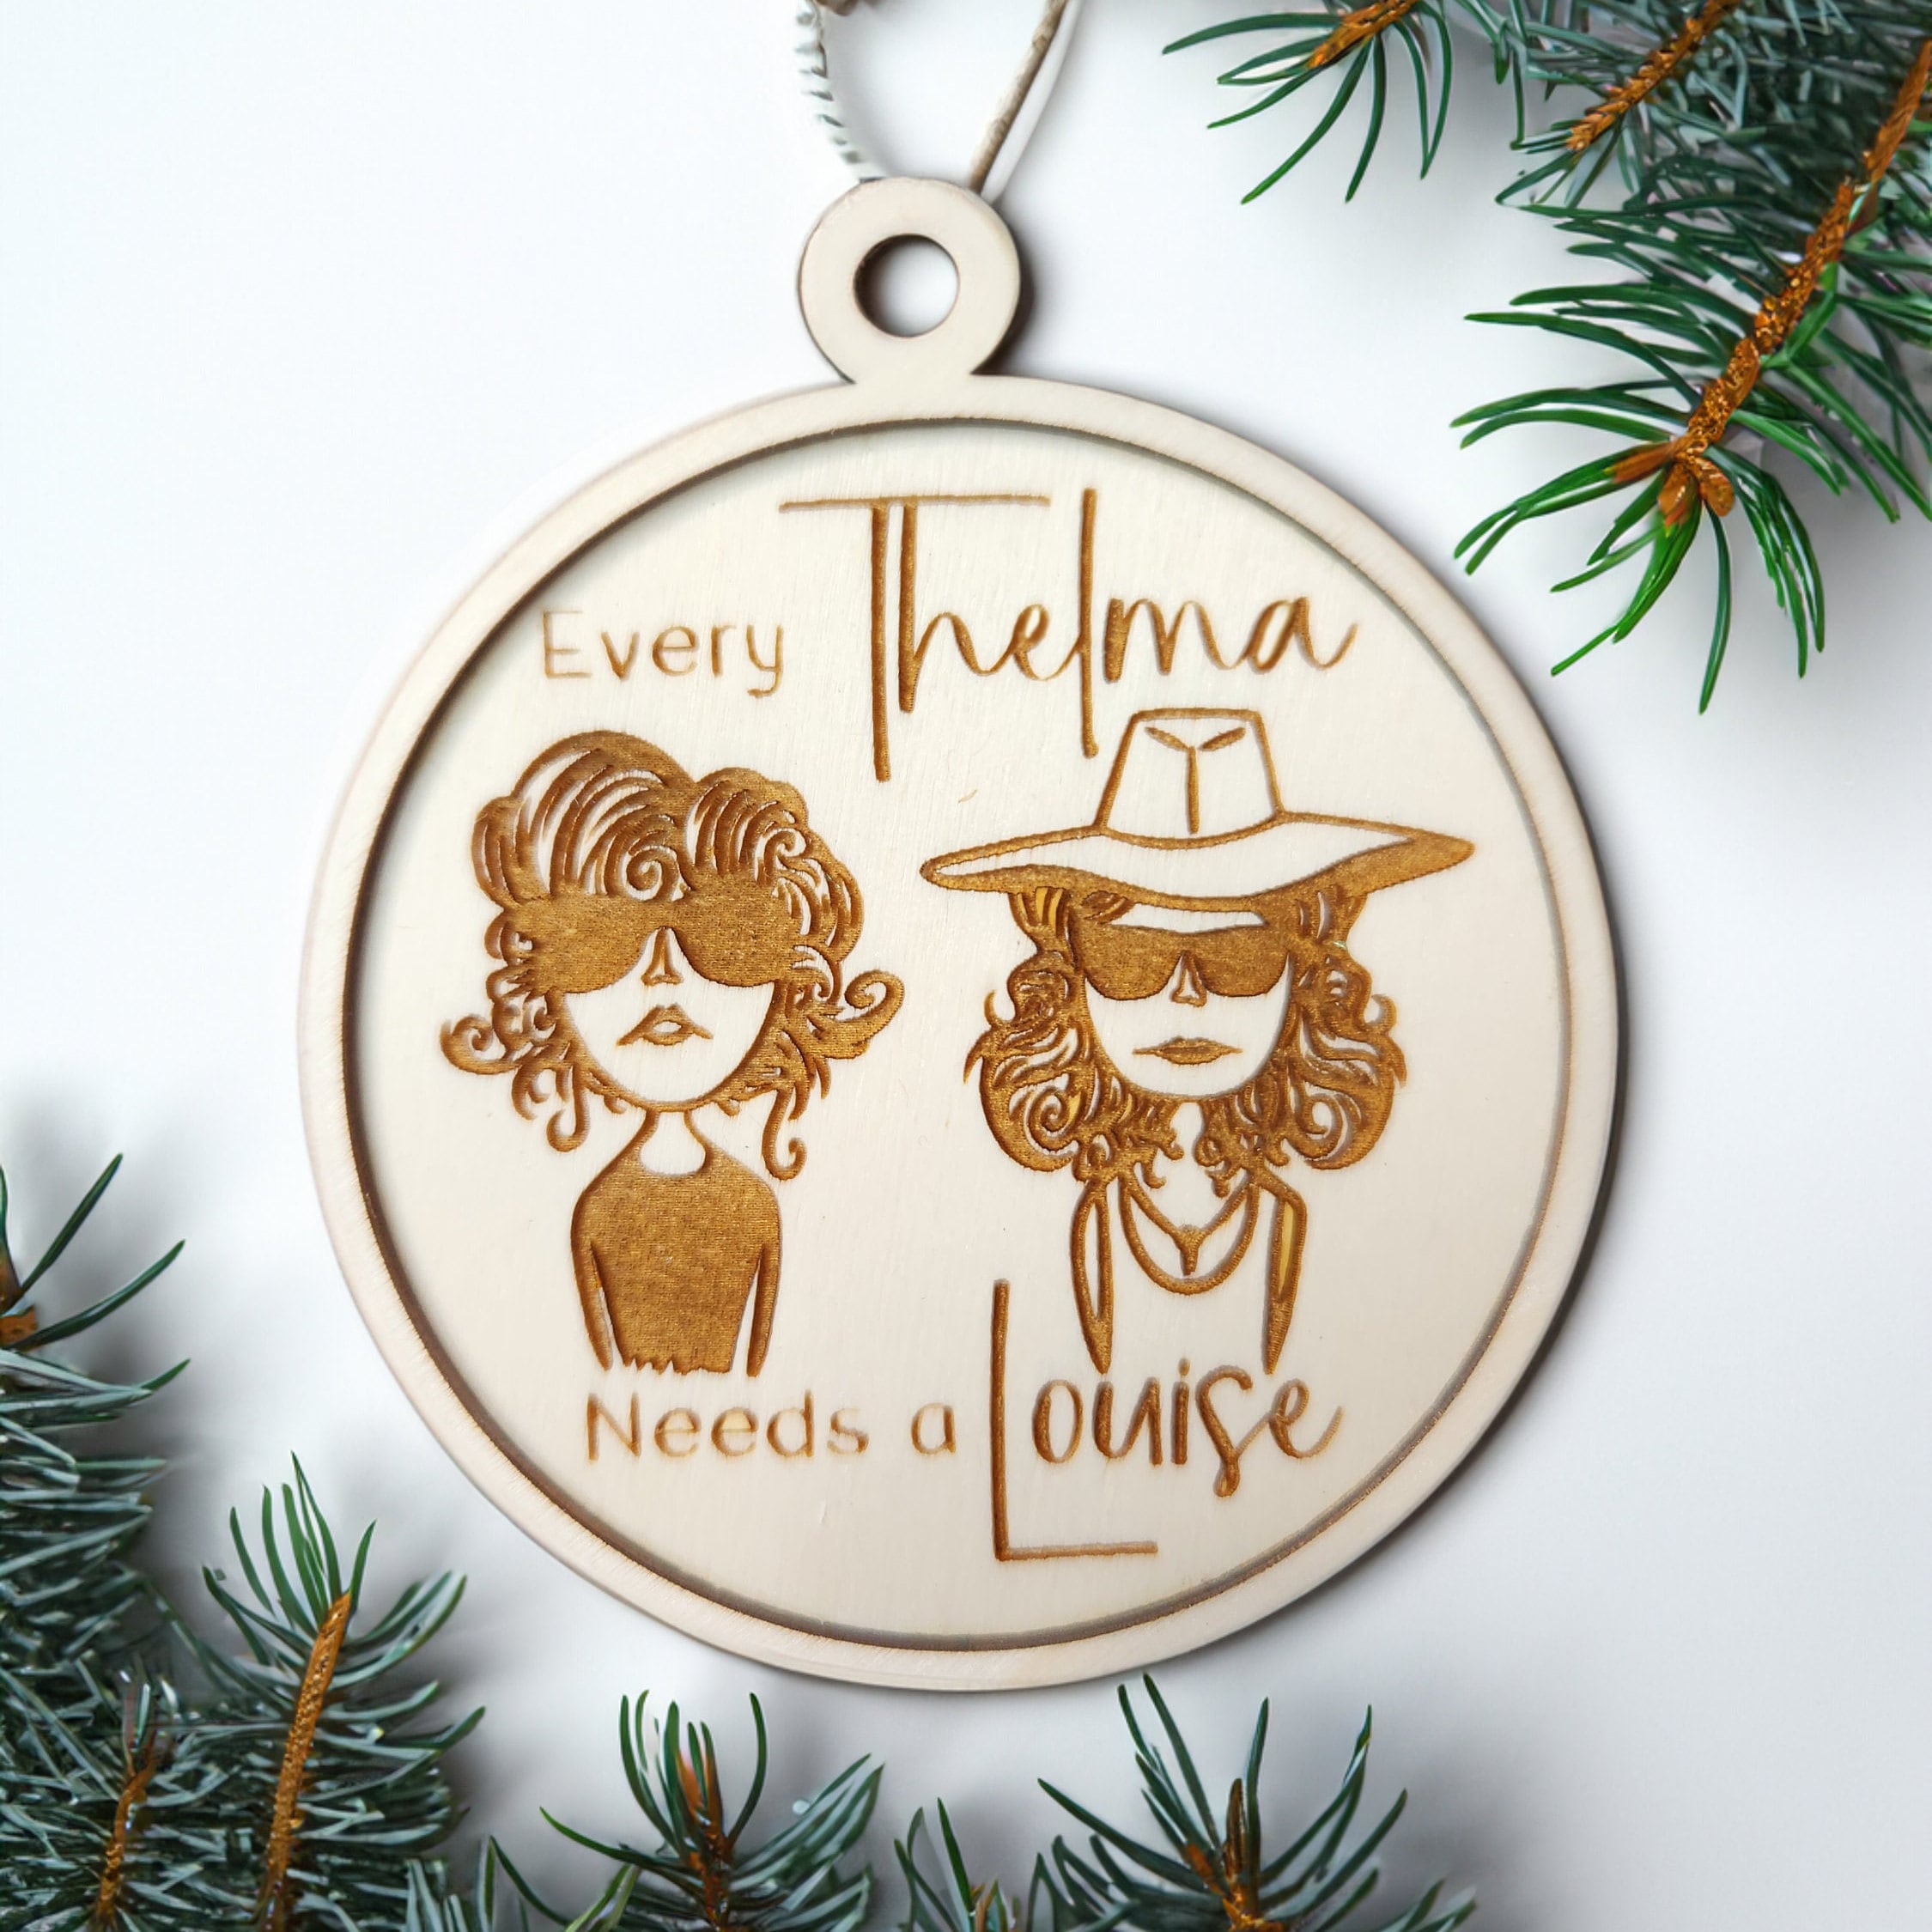 Couples Keychain Thelma and Louise BFF Gifts Sisters Gift -  UK